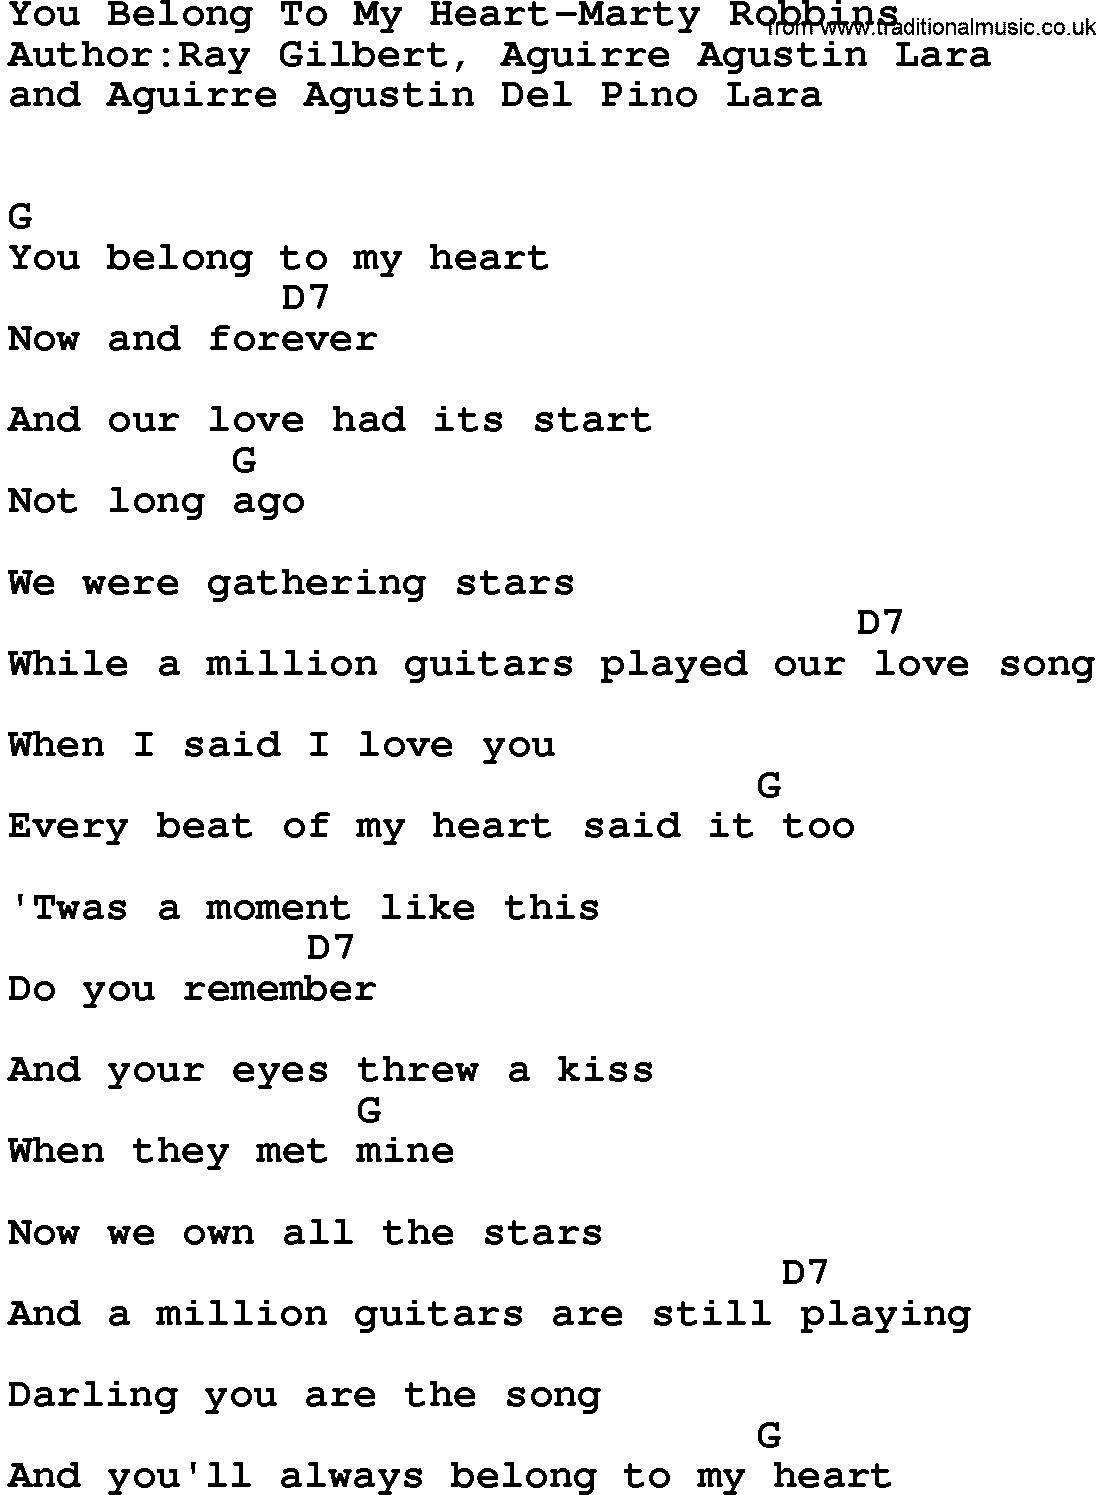 Country music song: You Belong To My Heart-Marty Robbins lyrics and chords